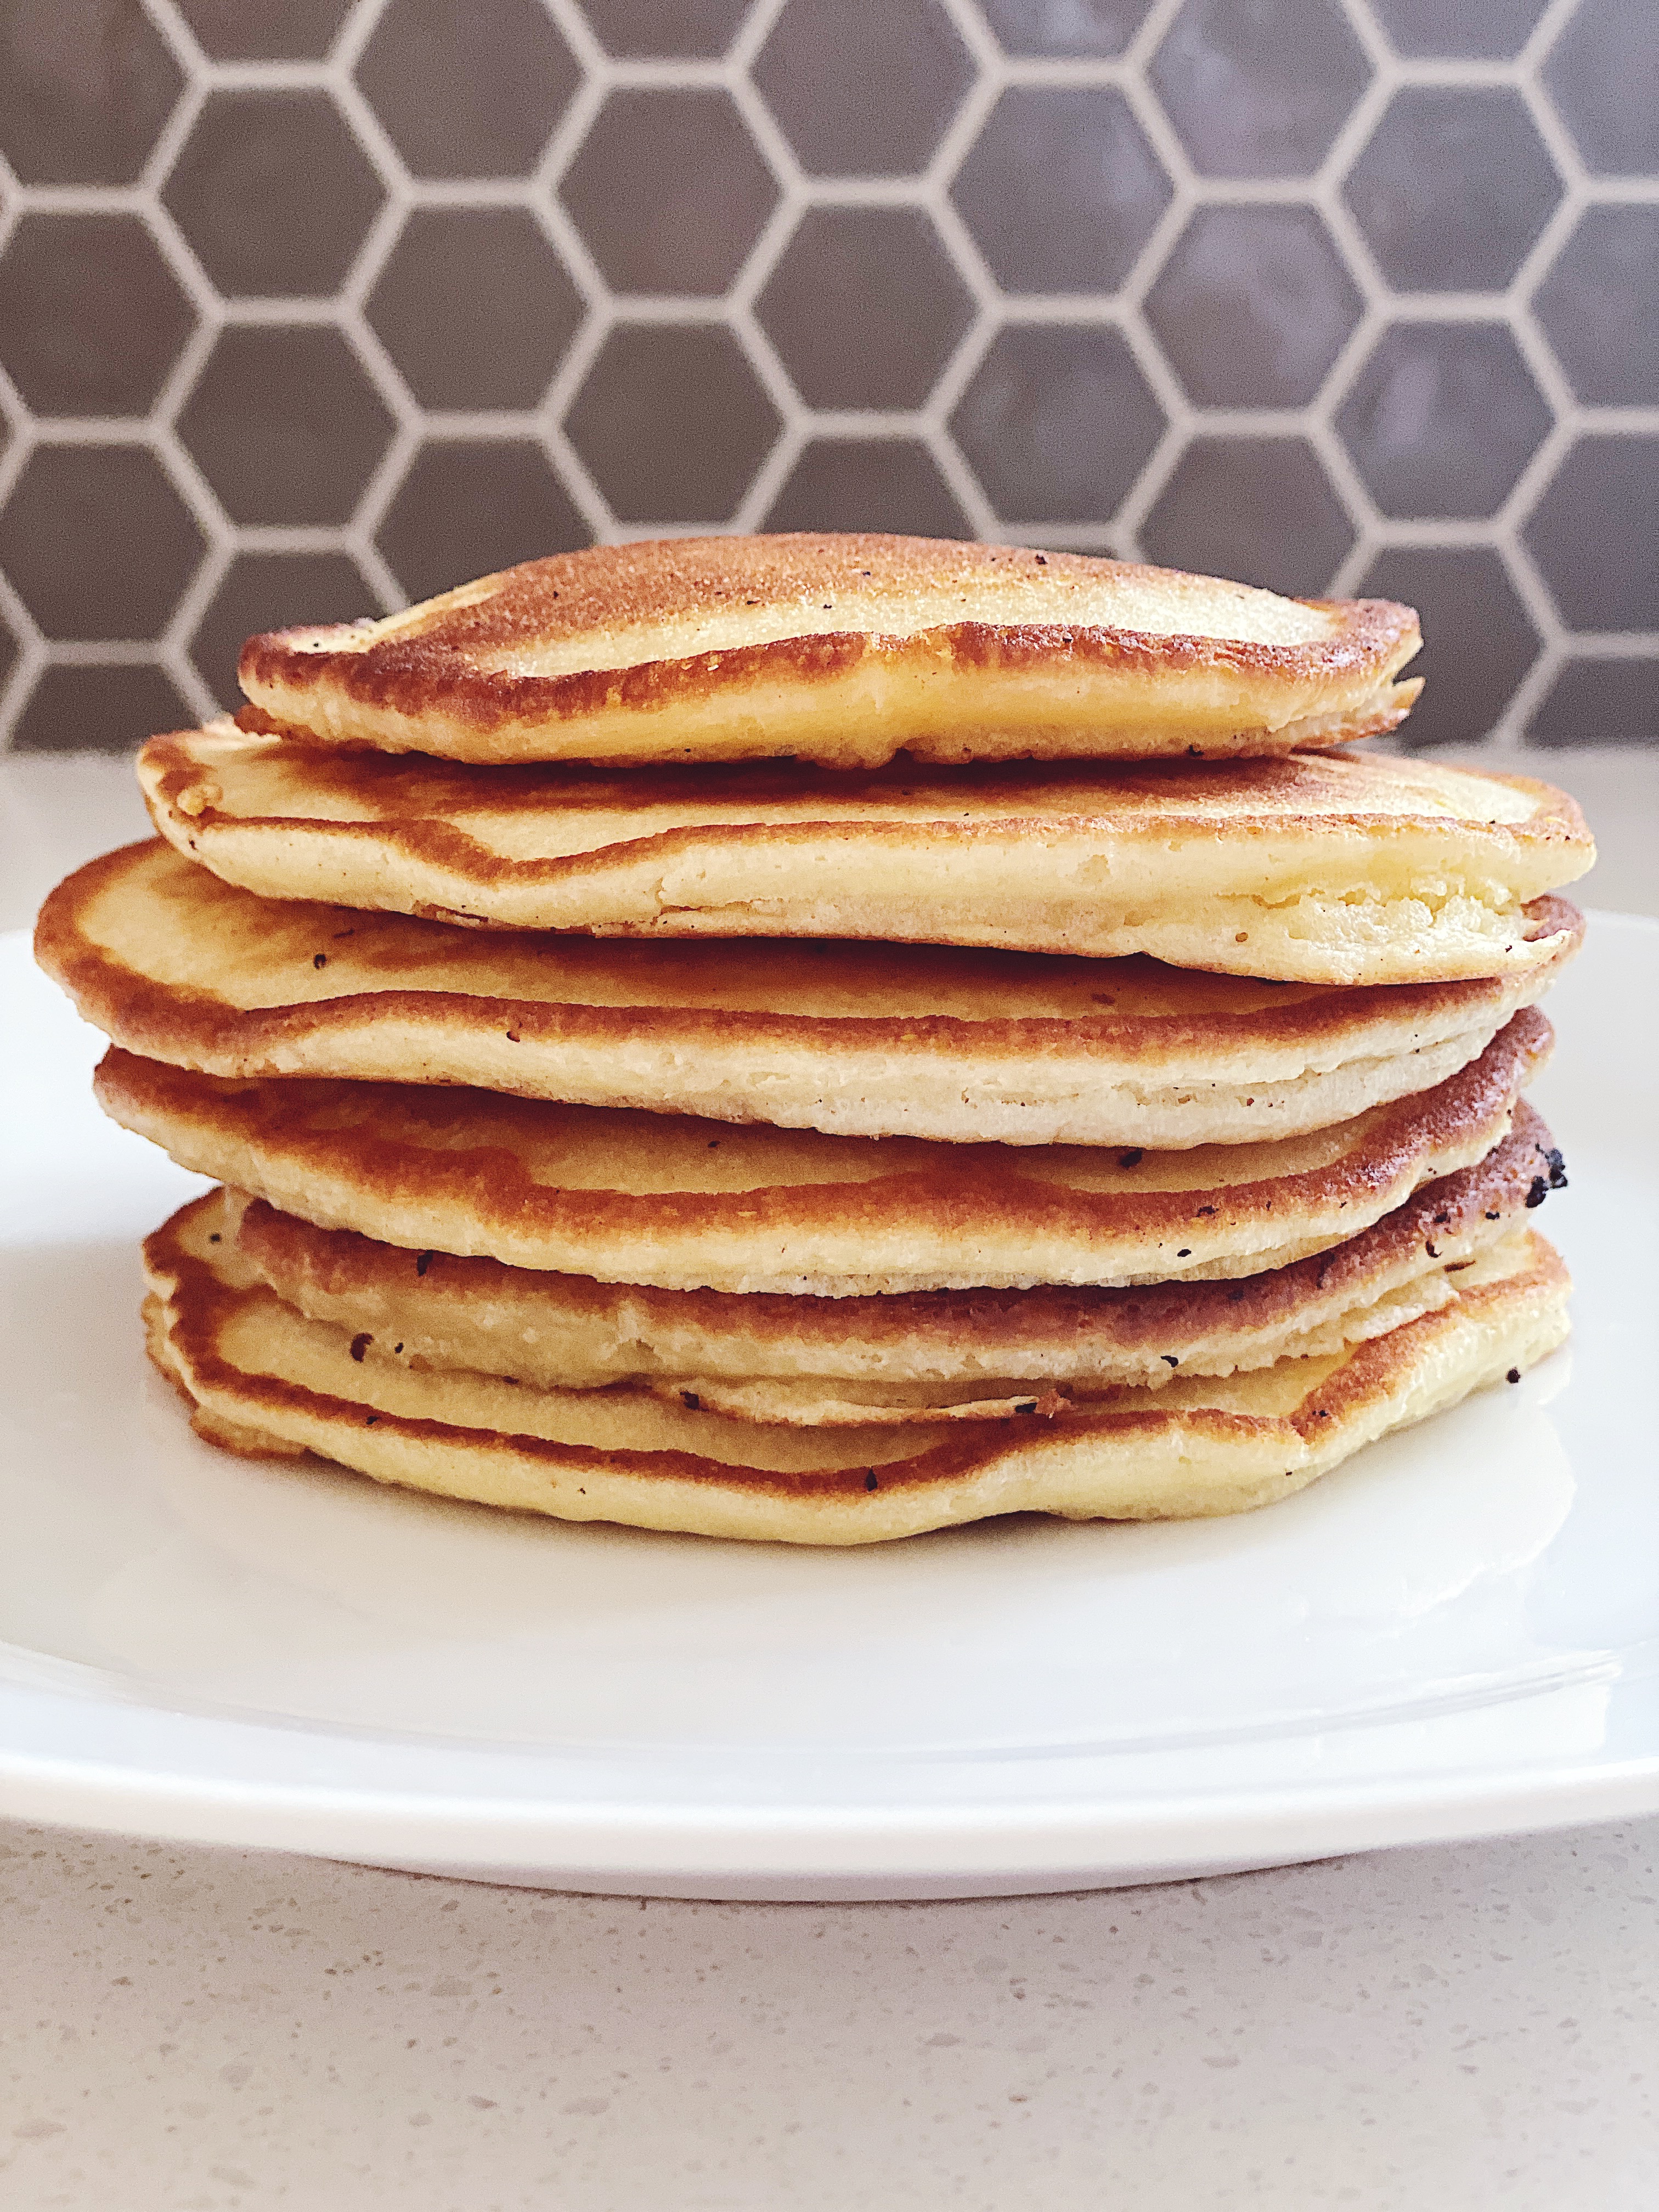 How To Make Simple Homemade Pancakes - The Cool Mom